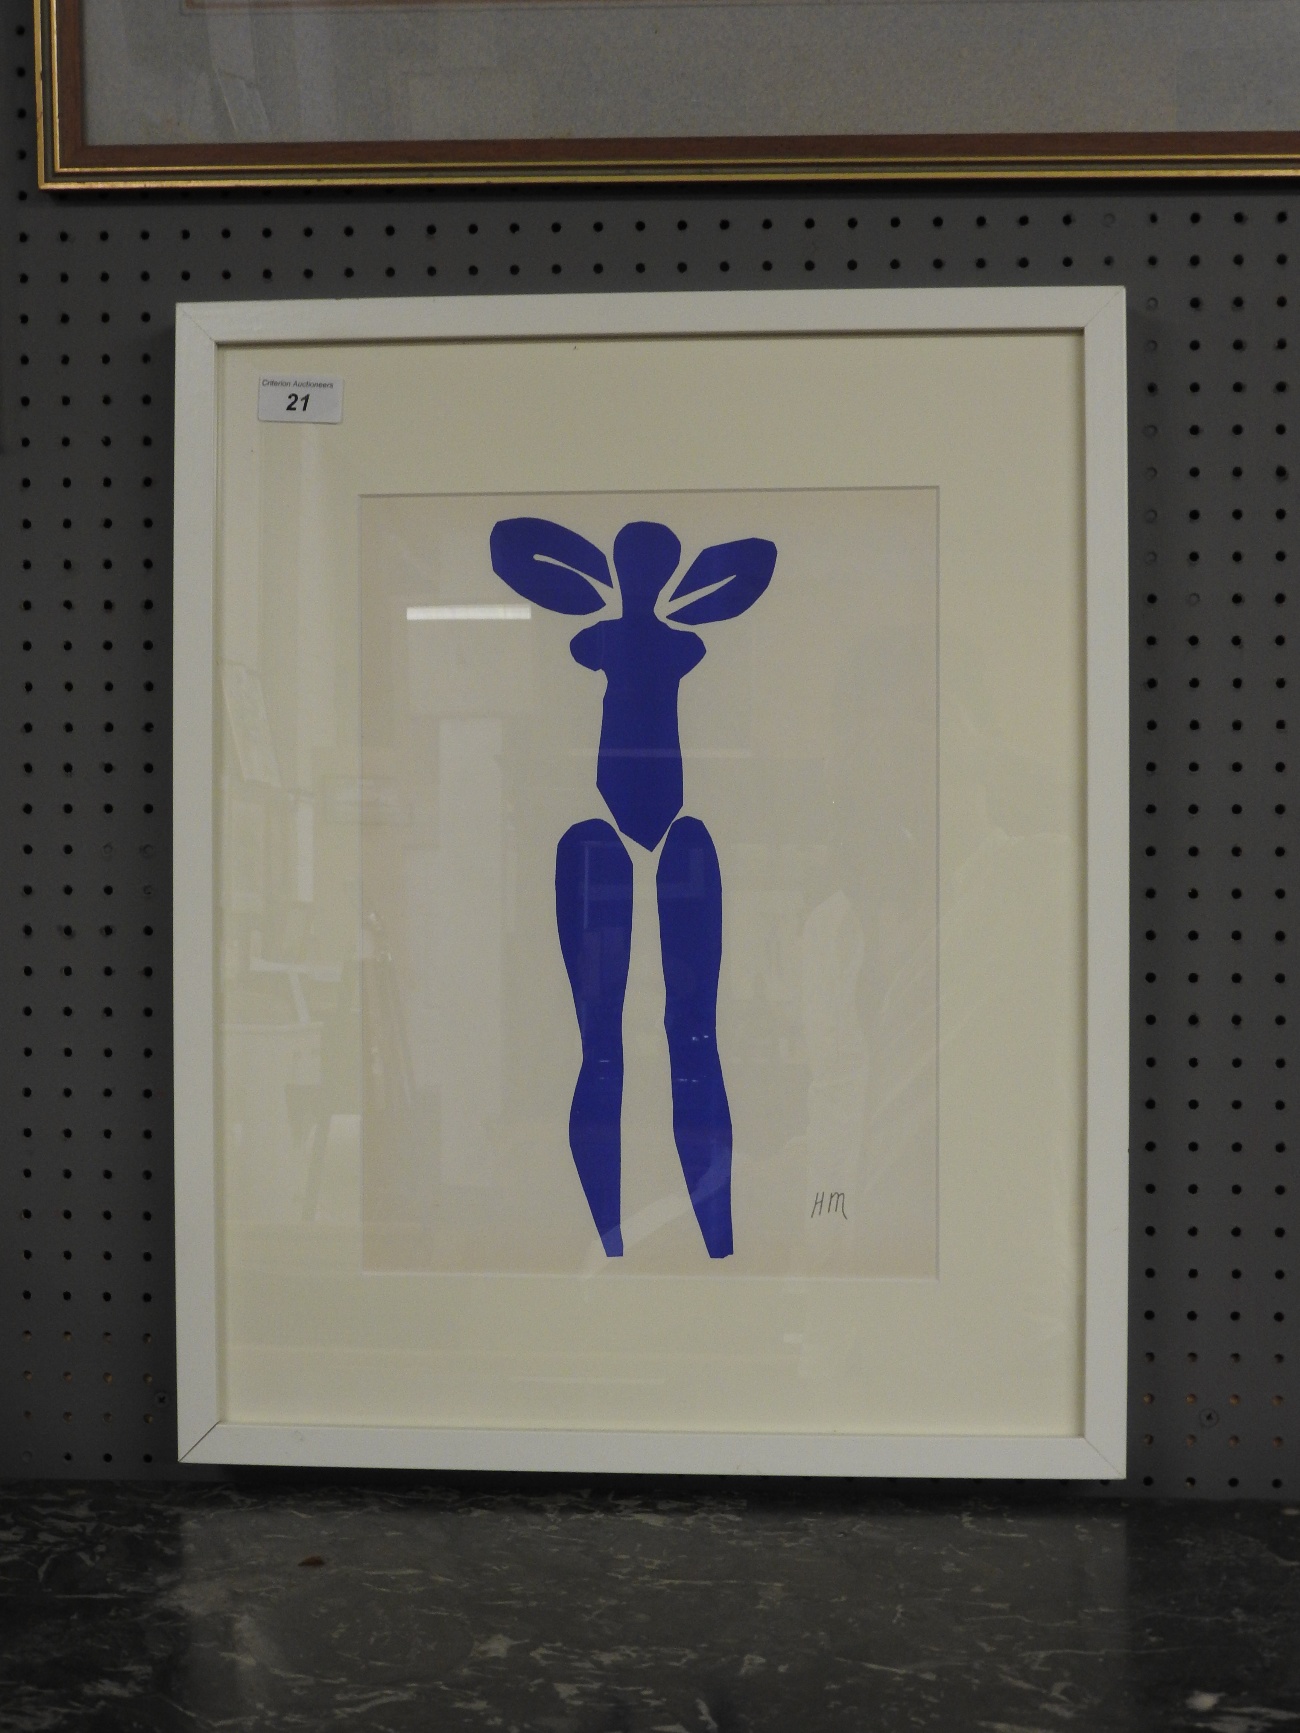 Henri Matisse print 'Nu Bleu X' after cut-out from the 1954 edition - Image 2 of 2